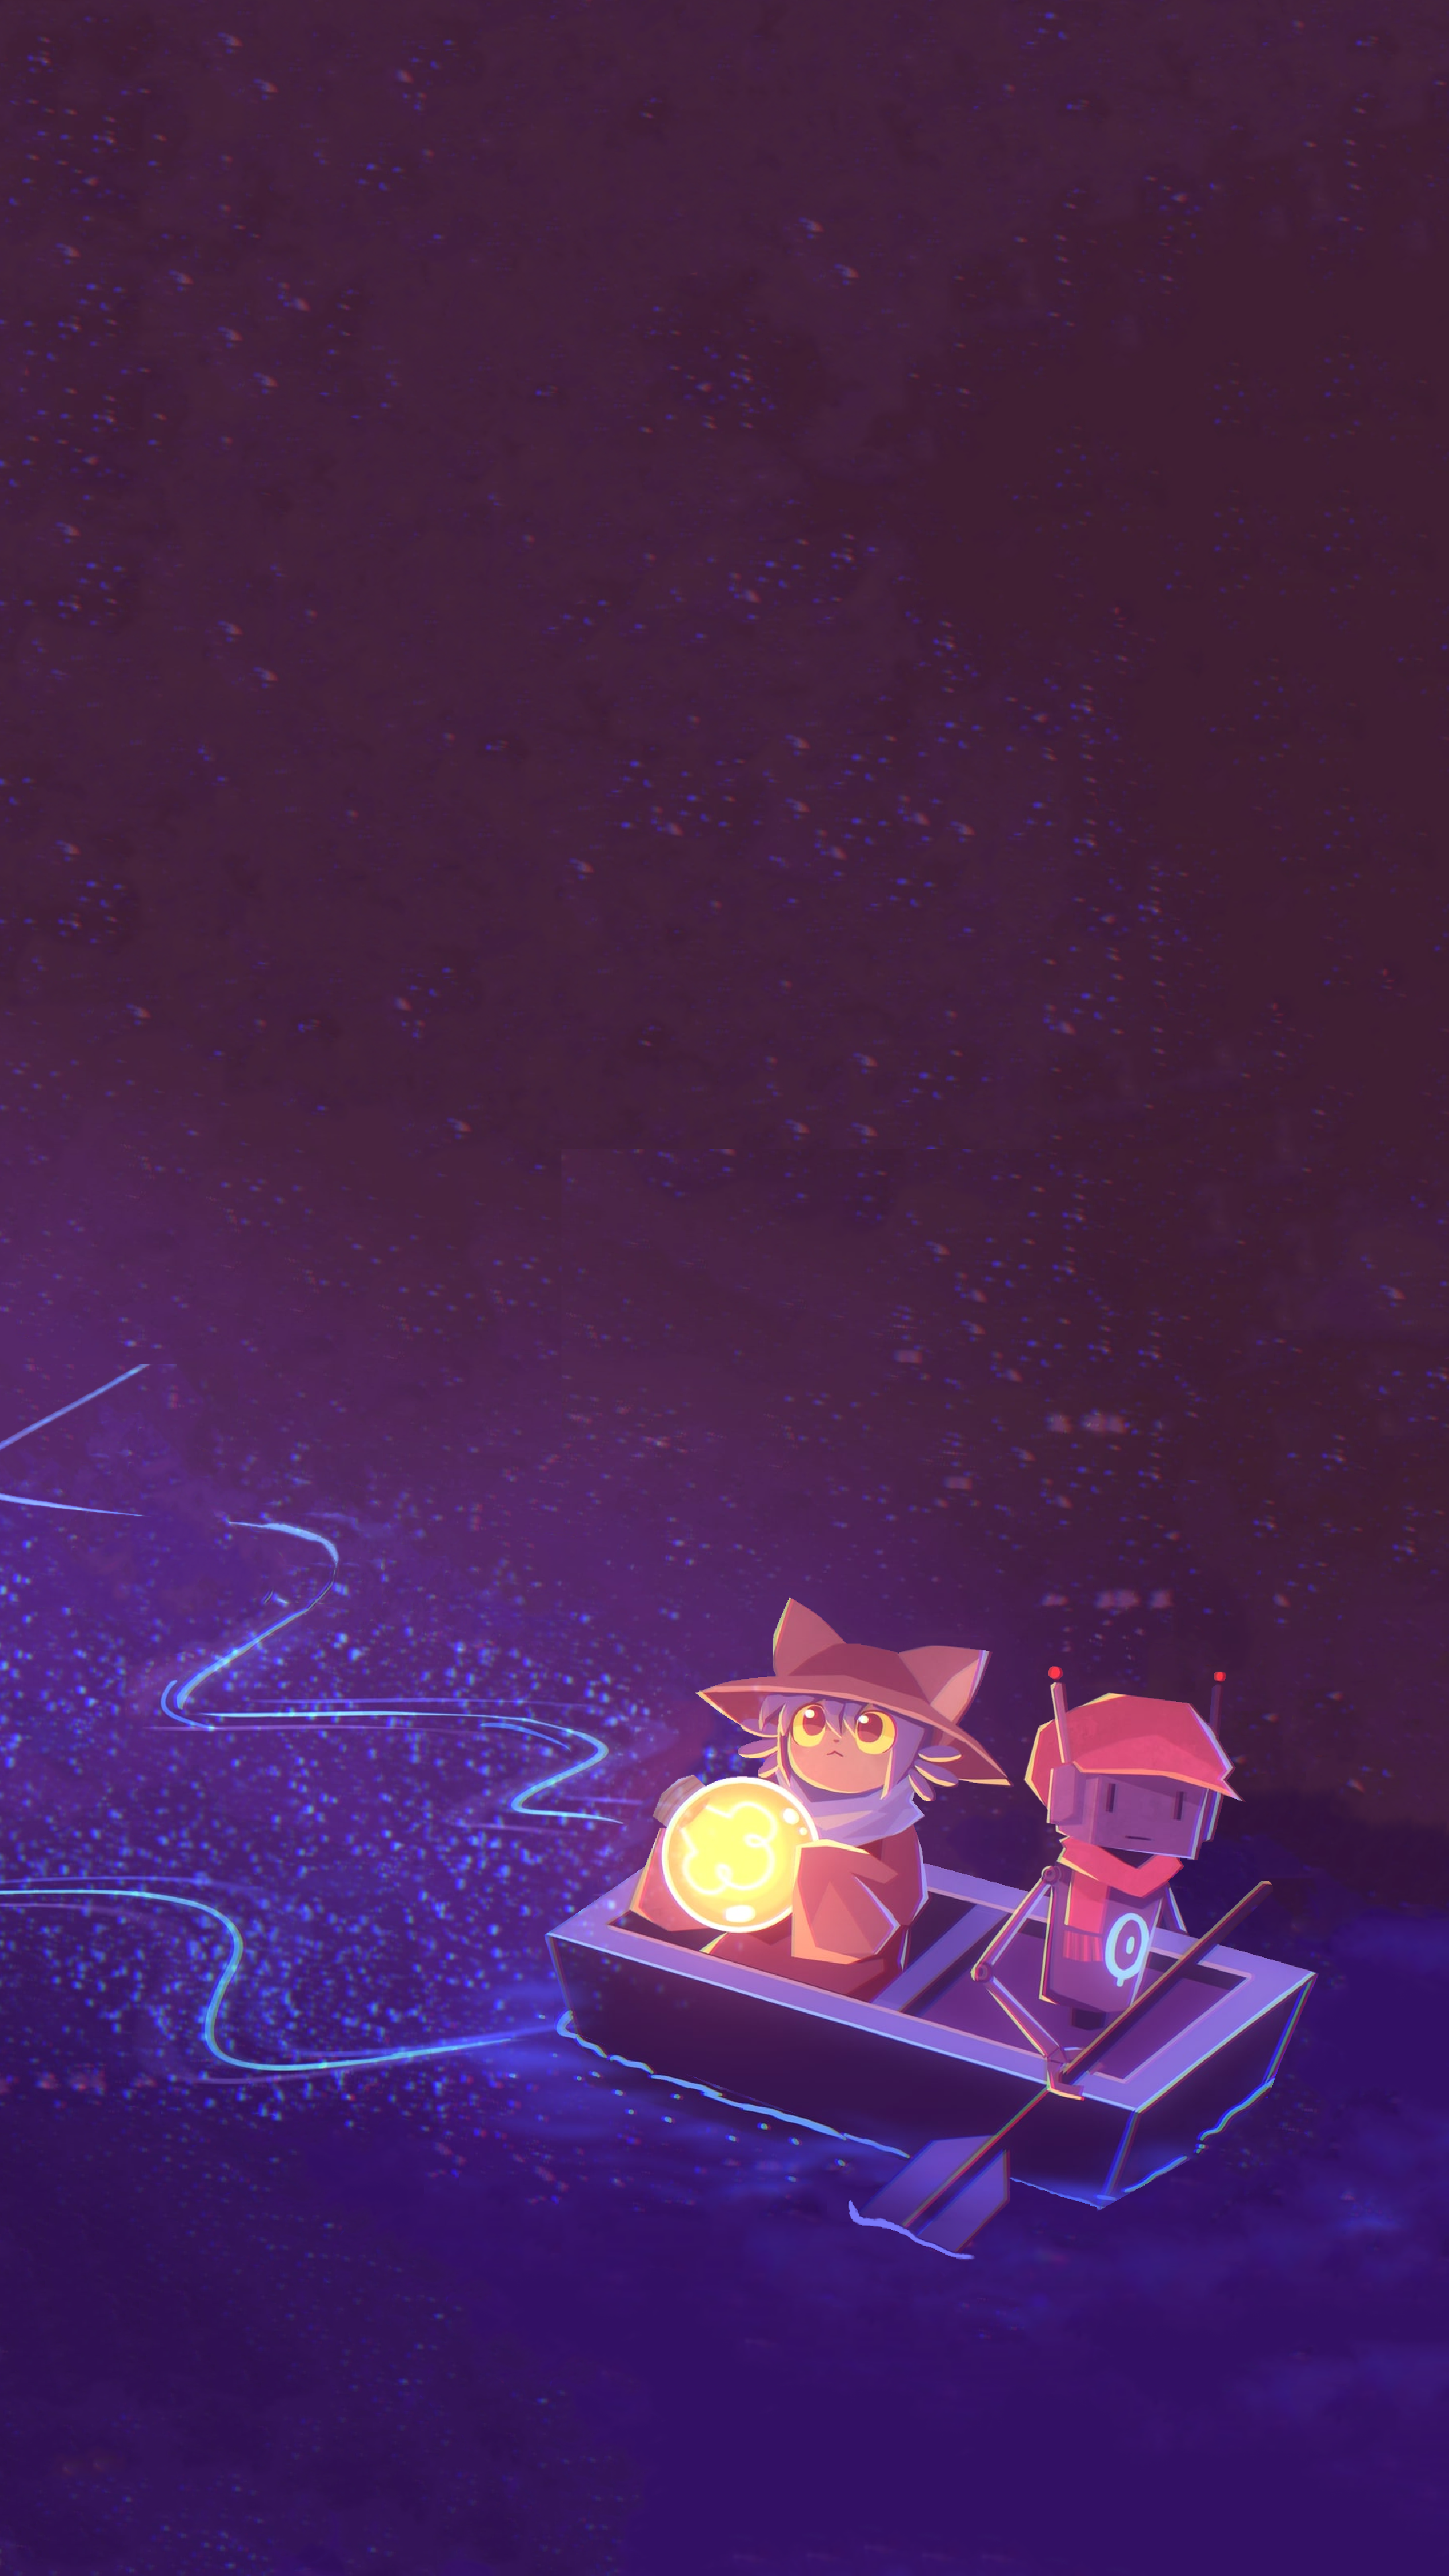 As a suggestion on my last post I decided to edit my wallpaper and made it so Niko and the Rowbot are smaller and not zoomed or crop like my previous one :)